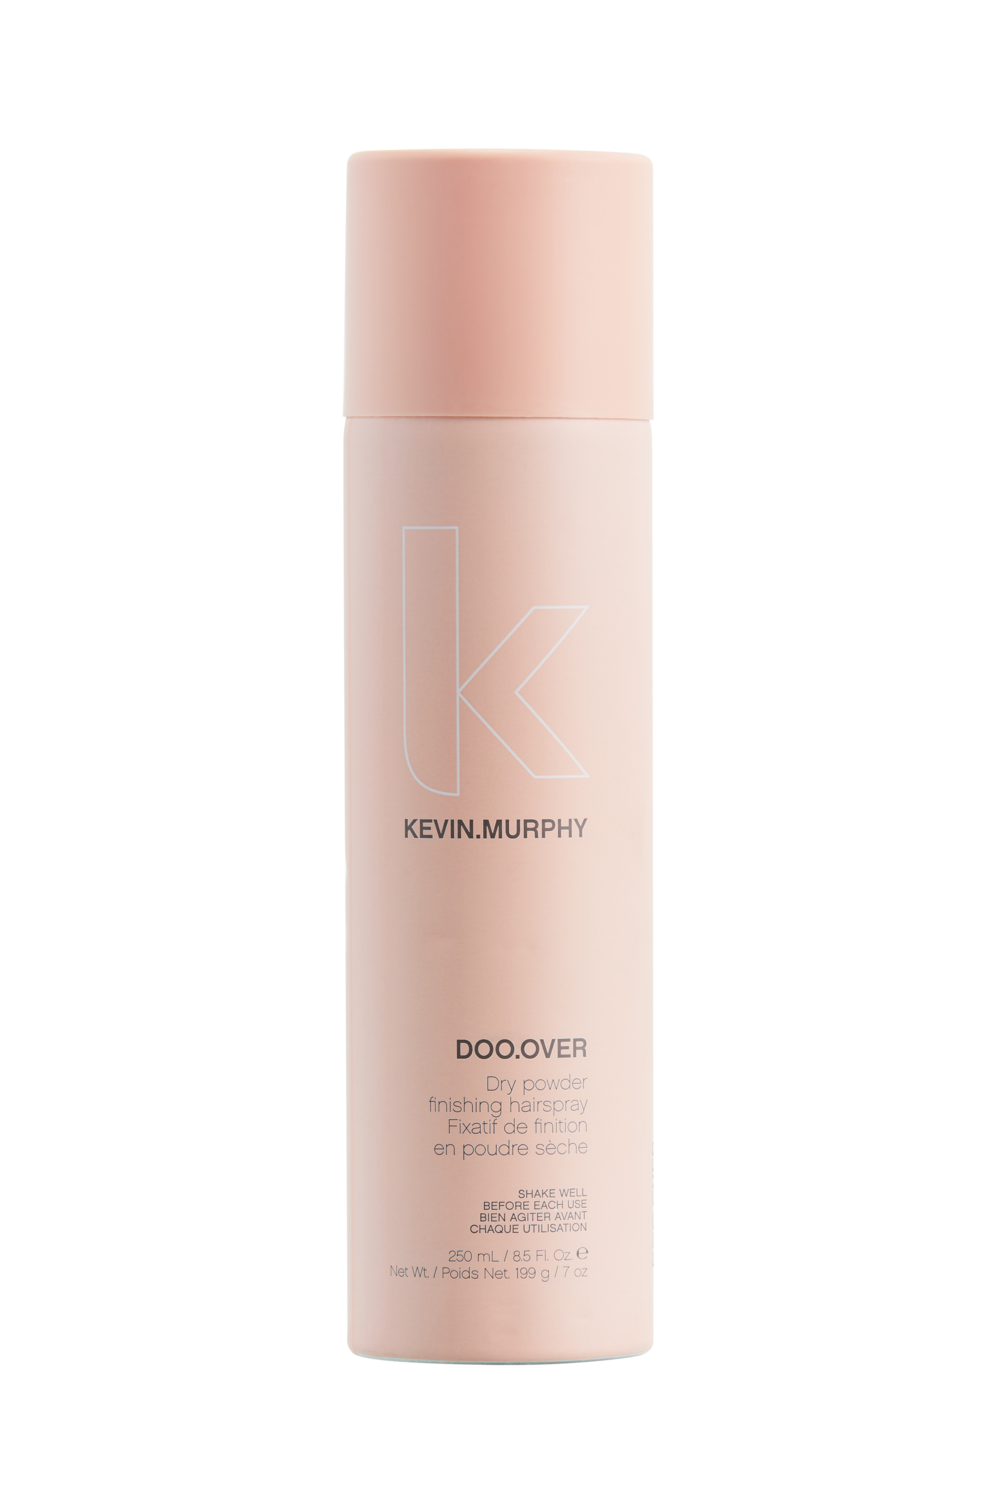 KEVIN.MURPHY DOO.OVER — House of Lange Hair